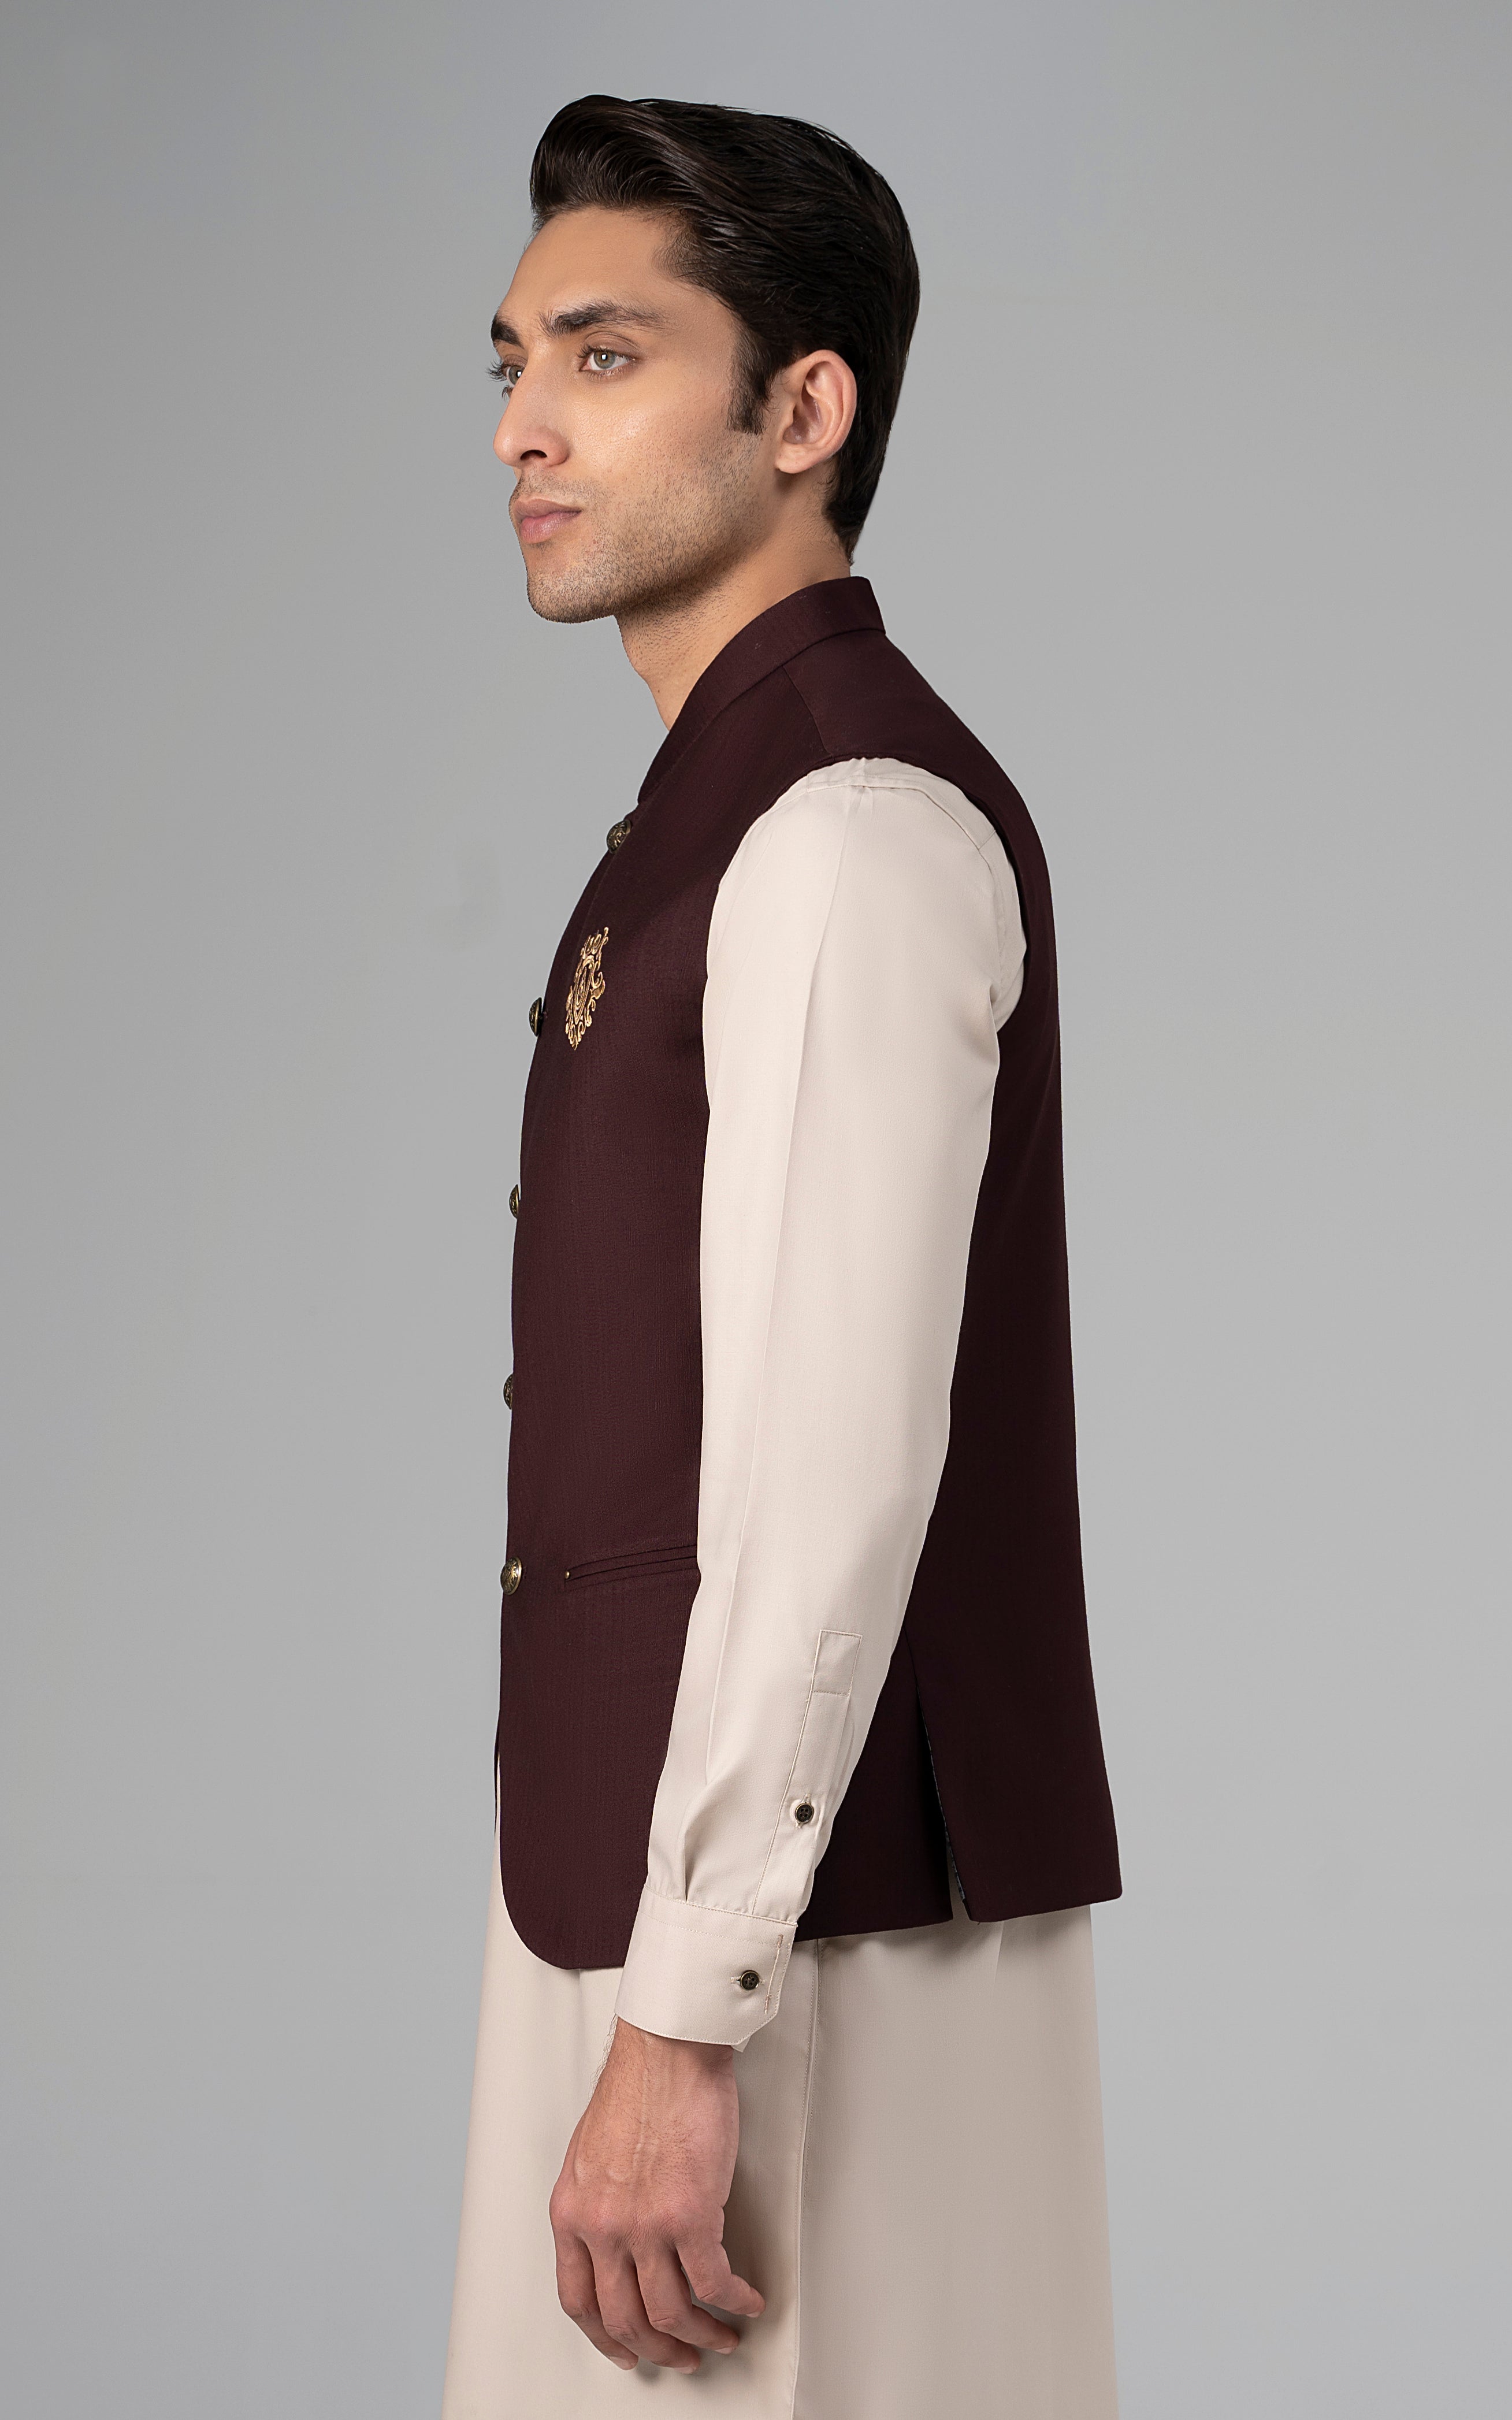 TROPICAL LOGO EMBROIDERED WAISTCOAT - SIGATURE COLLECTION DEEP MAROON